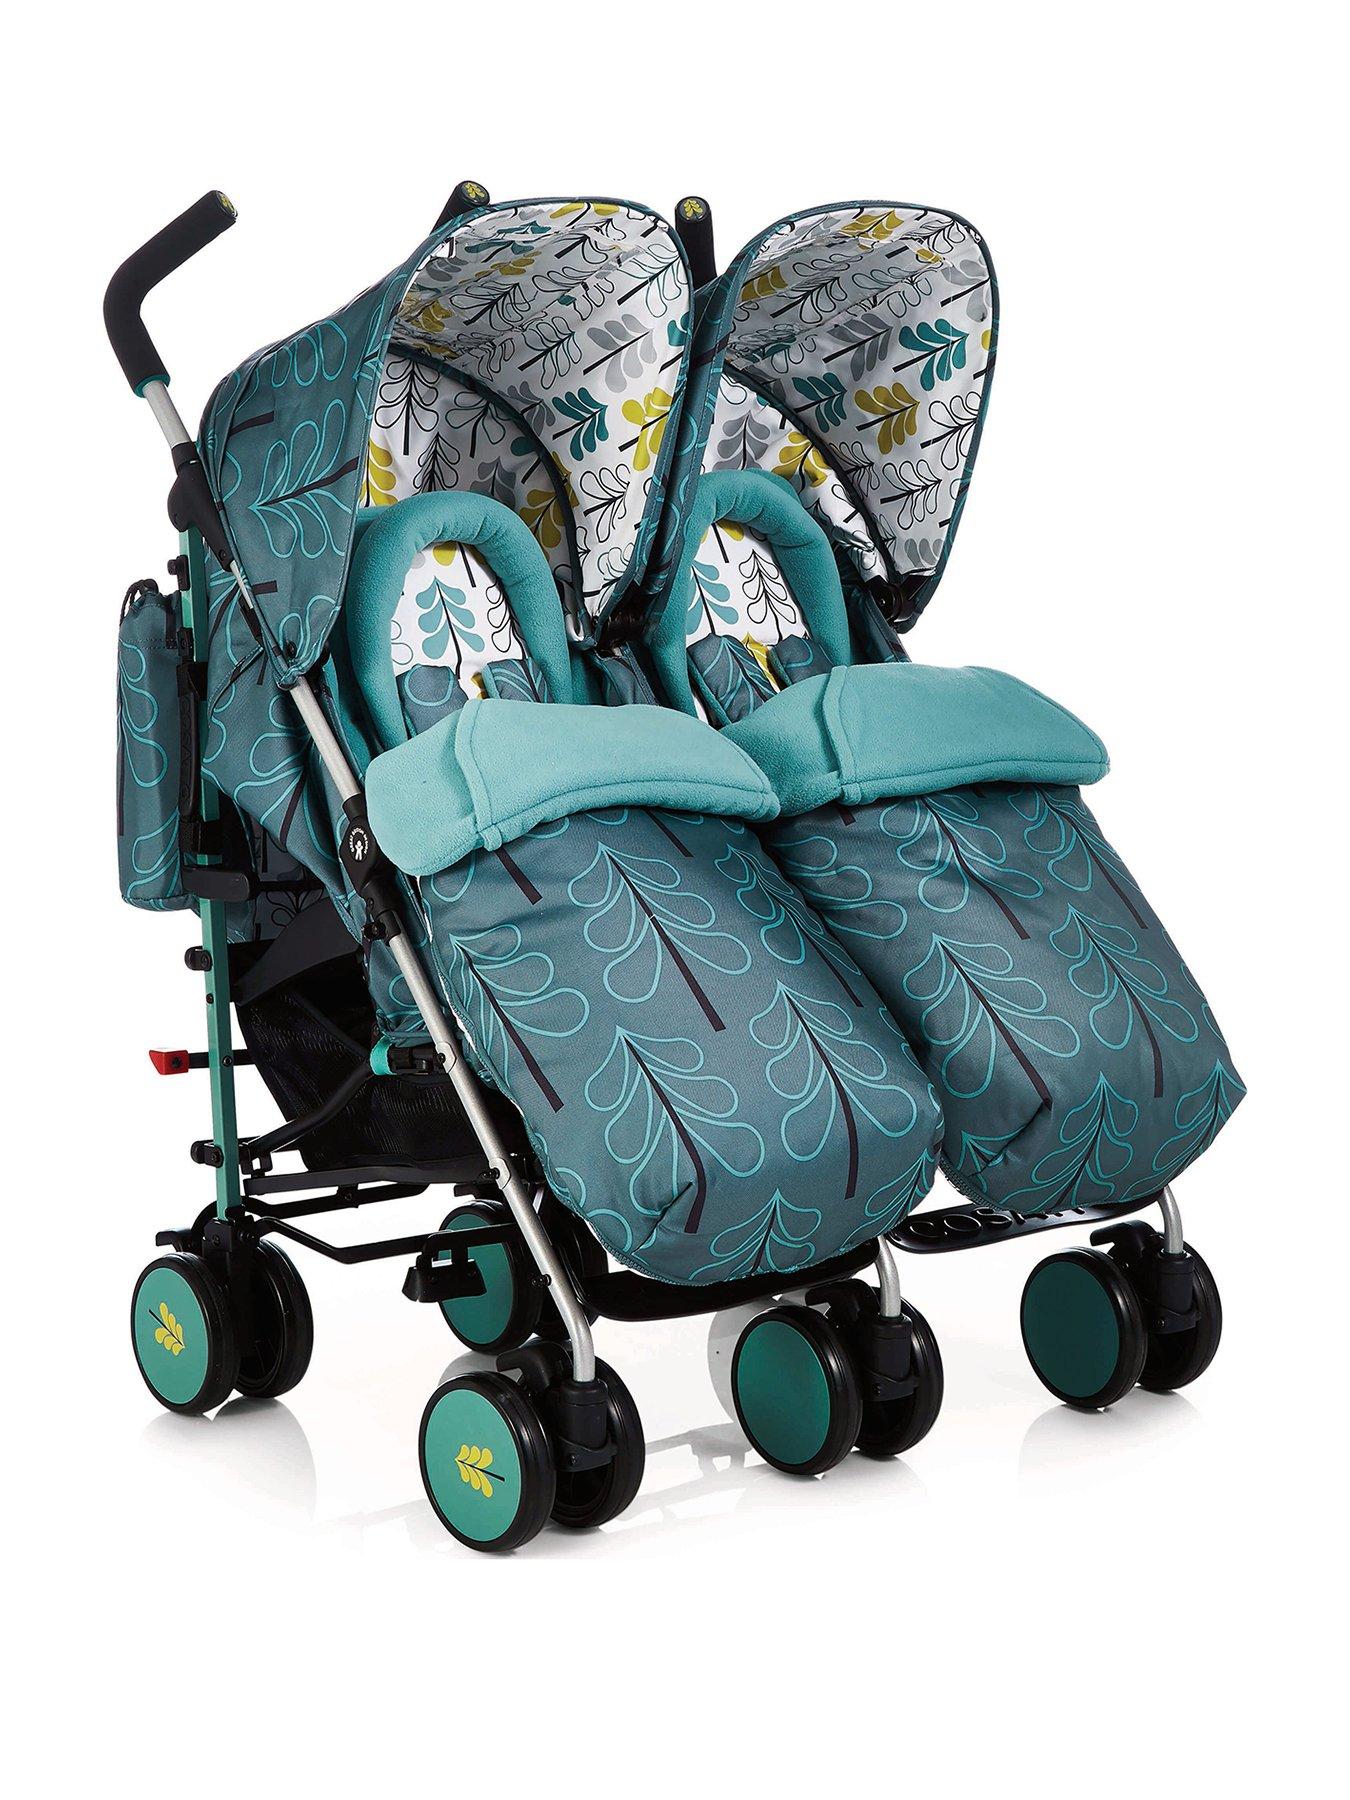 buggies for toddlers uk